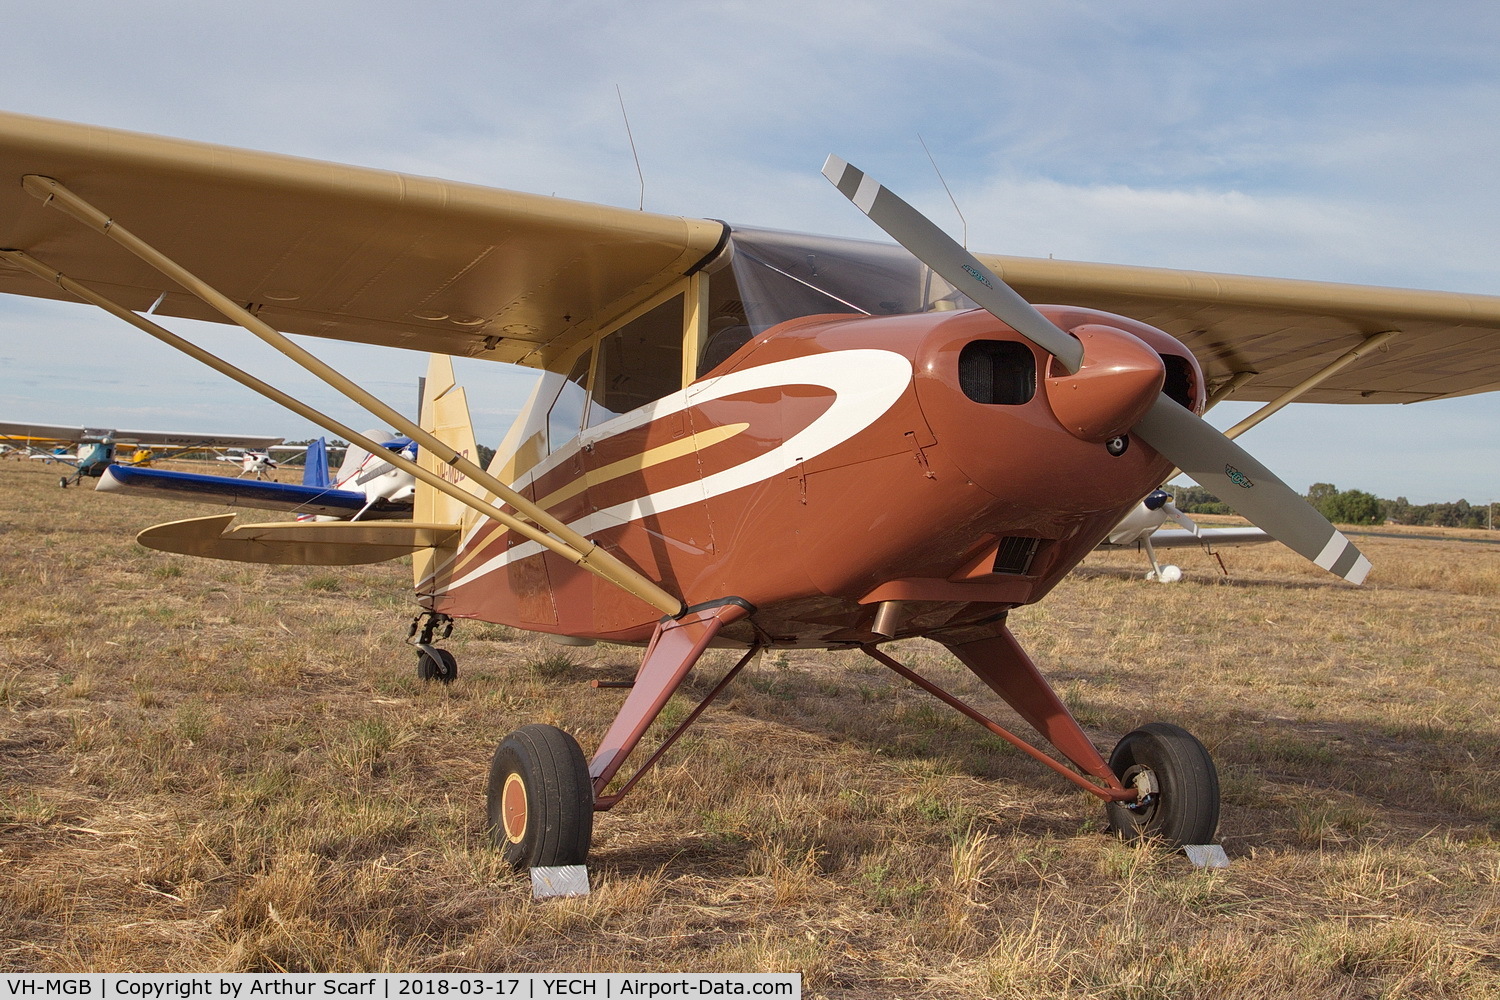 VH-MGB, 1959 Piper PA-22-150 Tri-Pacer C/N 22-6867, VH-MGB AAAA Fly in Echuca 2018